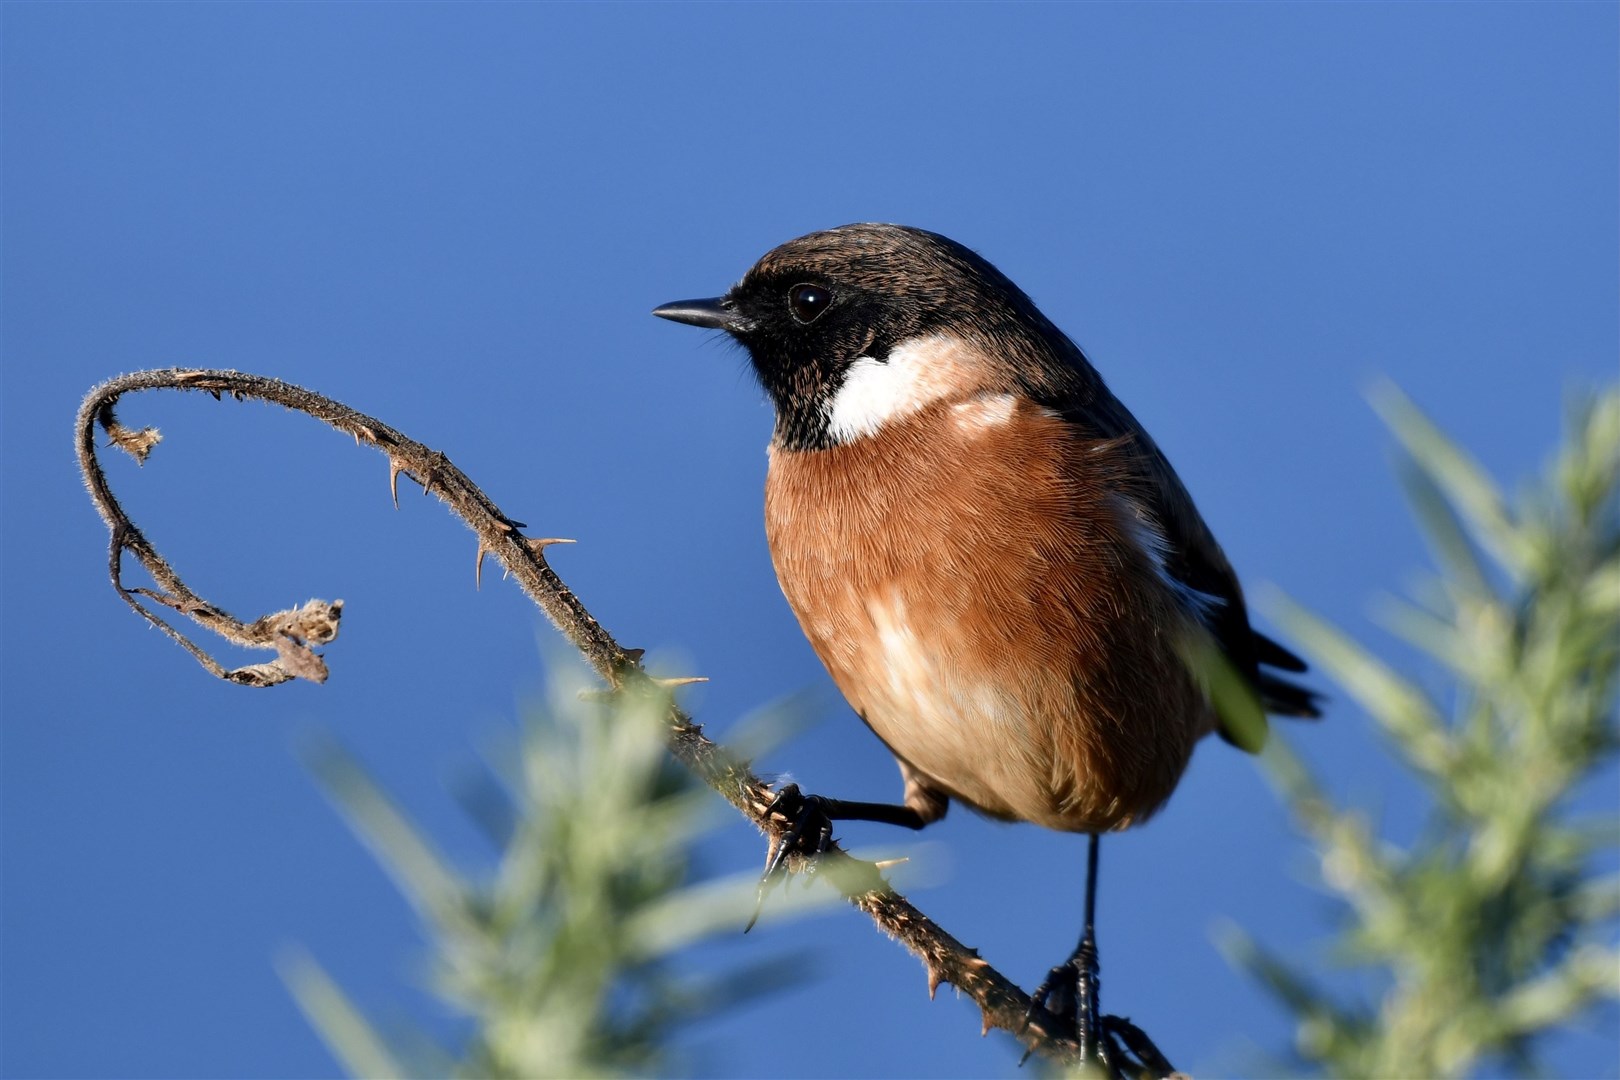 Hazel Thomson spotted this stonechat in Burghead while walking along the shore.